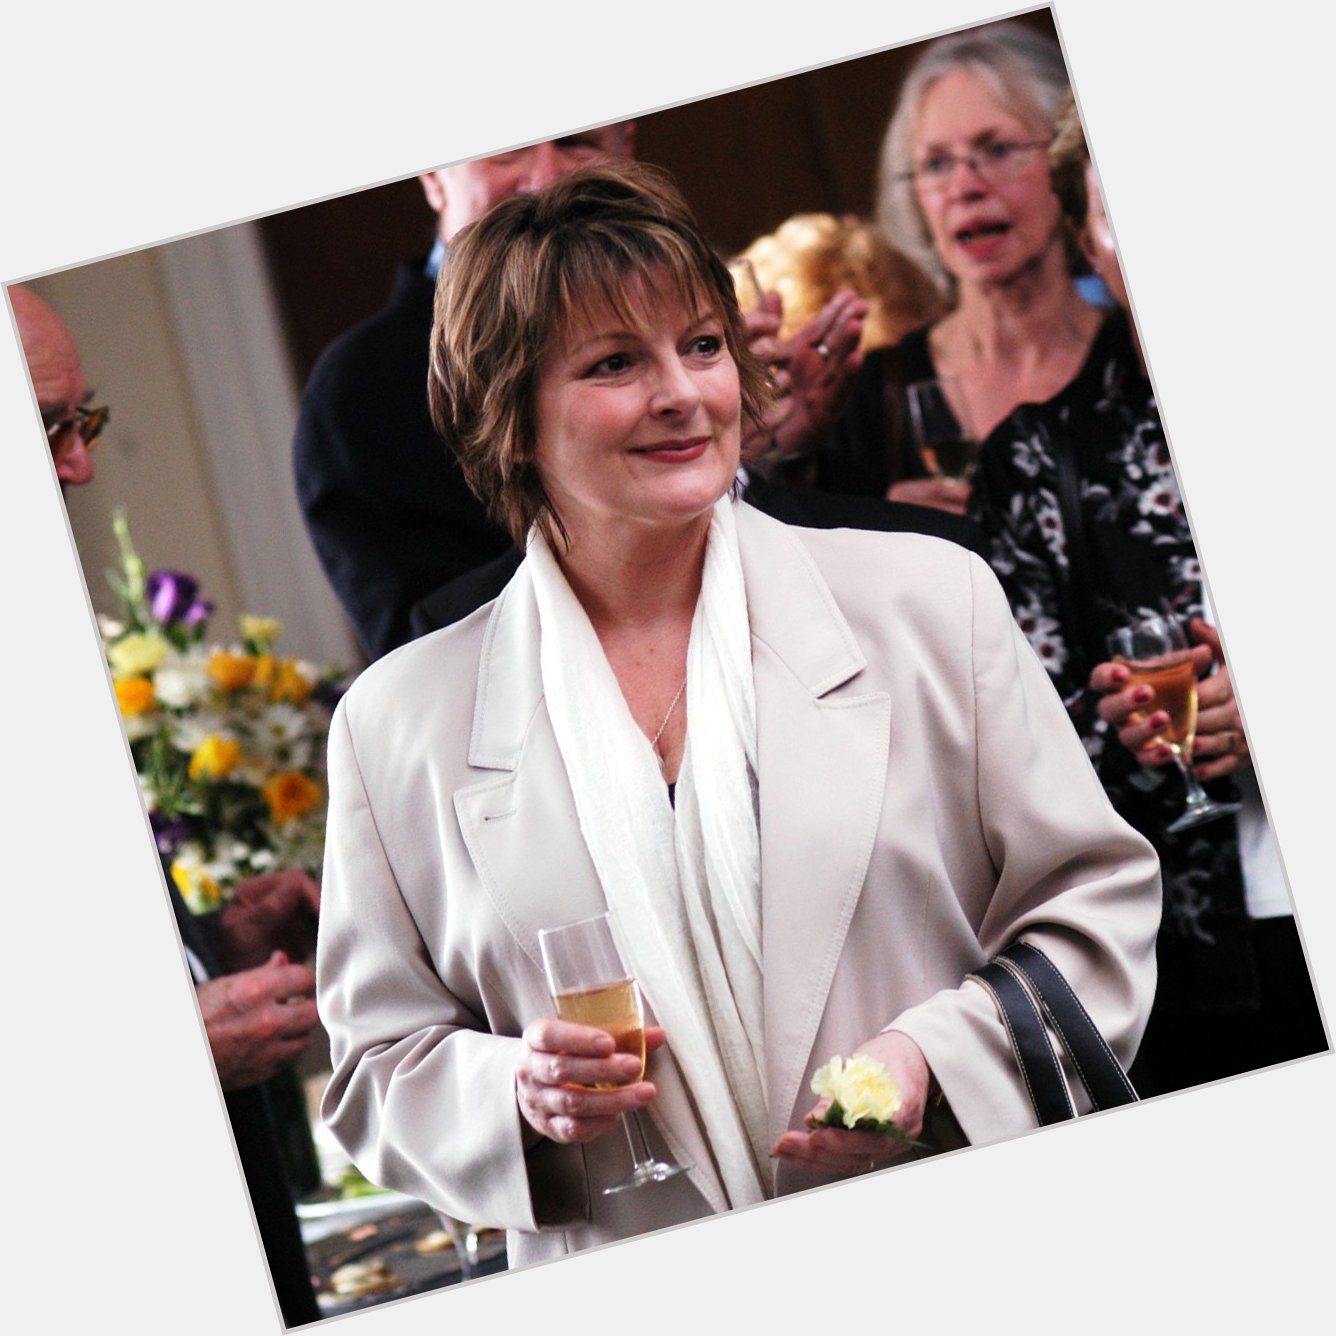 Happy birthday to one of our favorite leading ladies, Brenda Blethyn!  